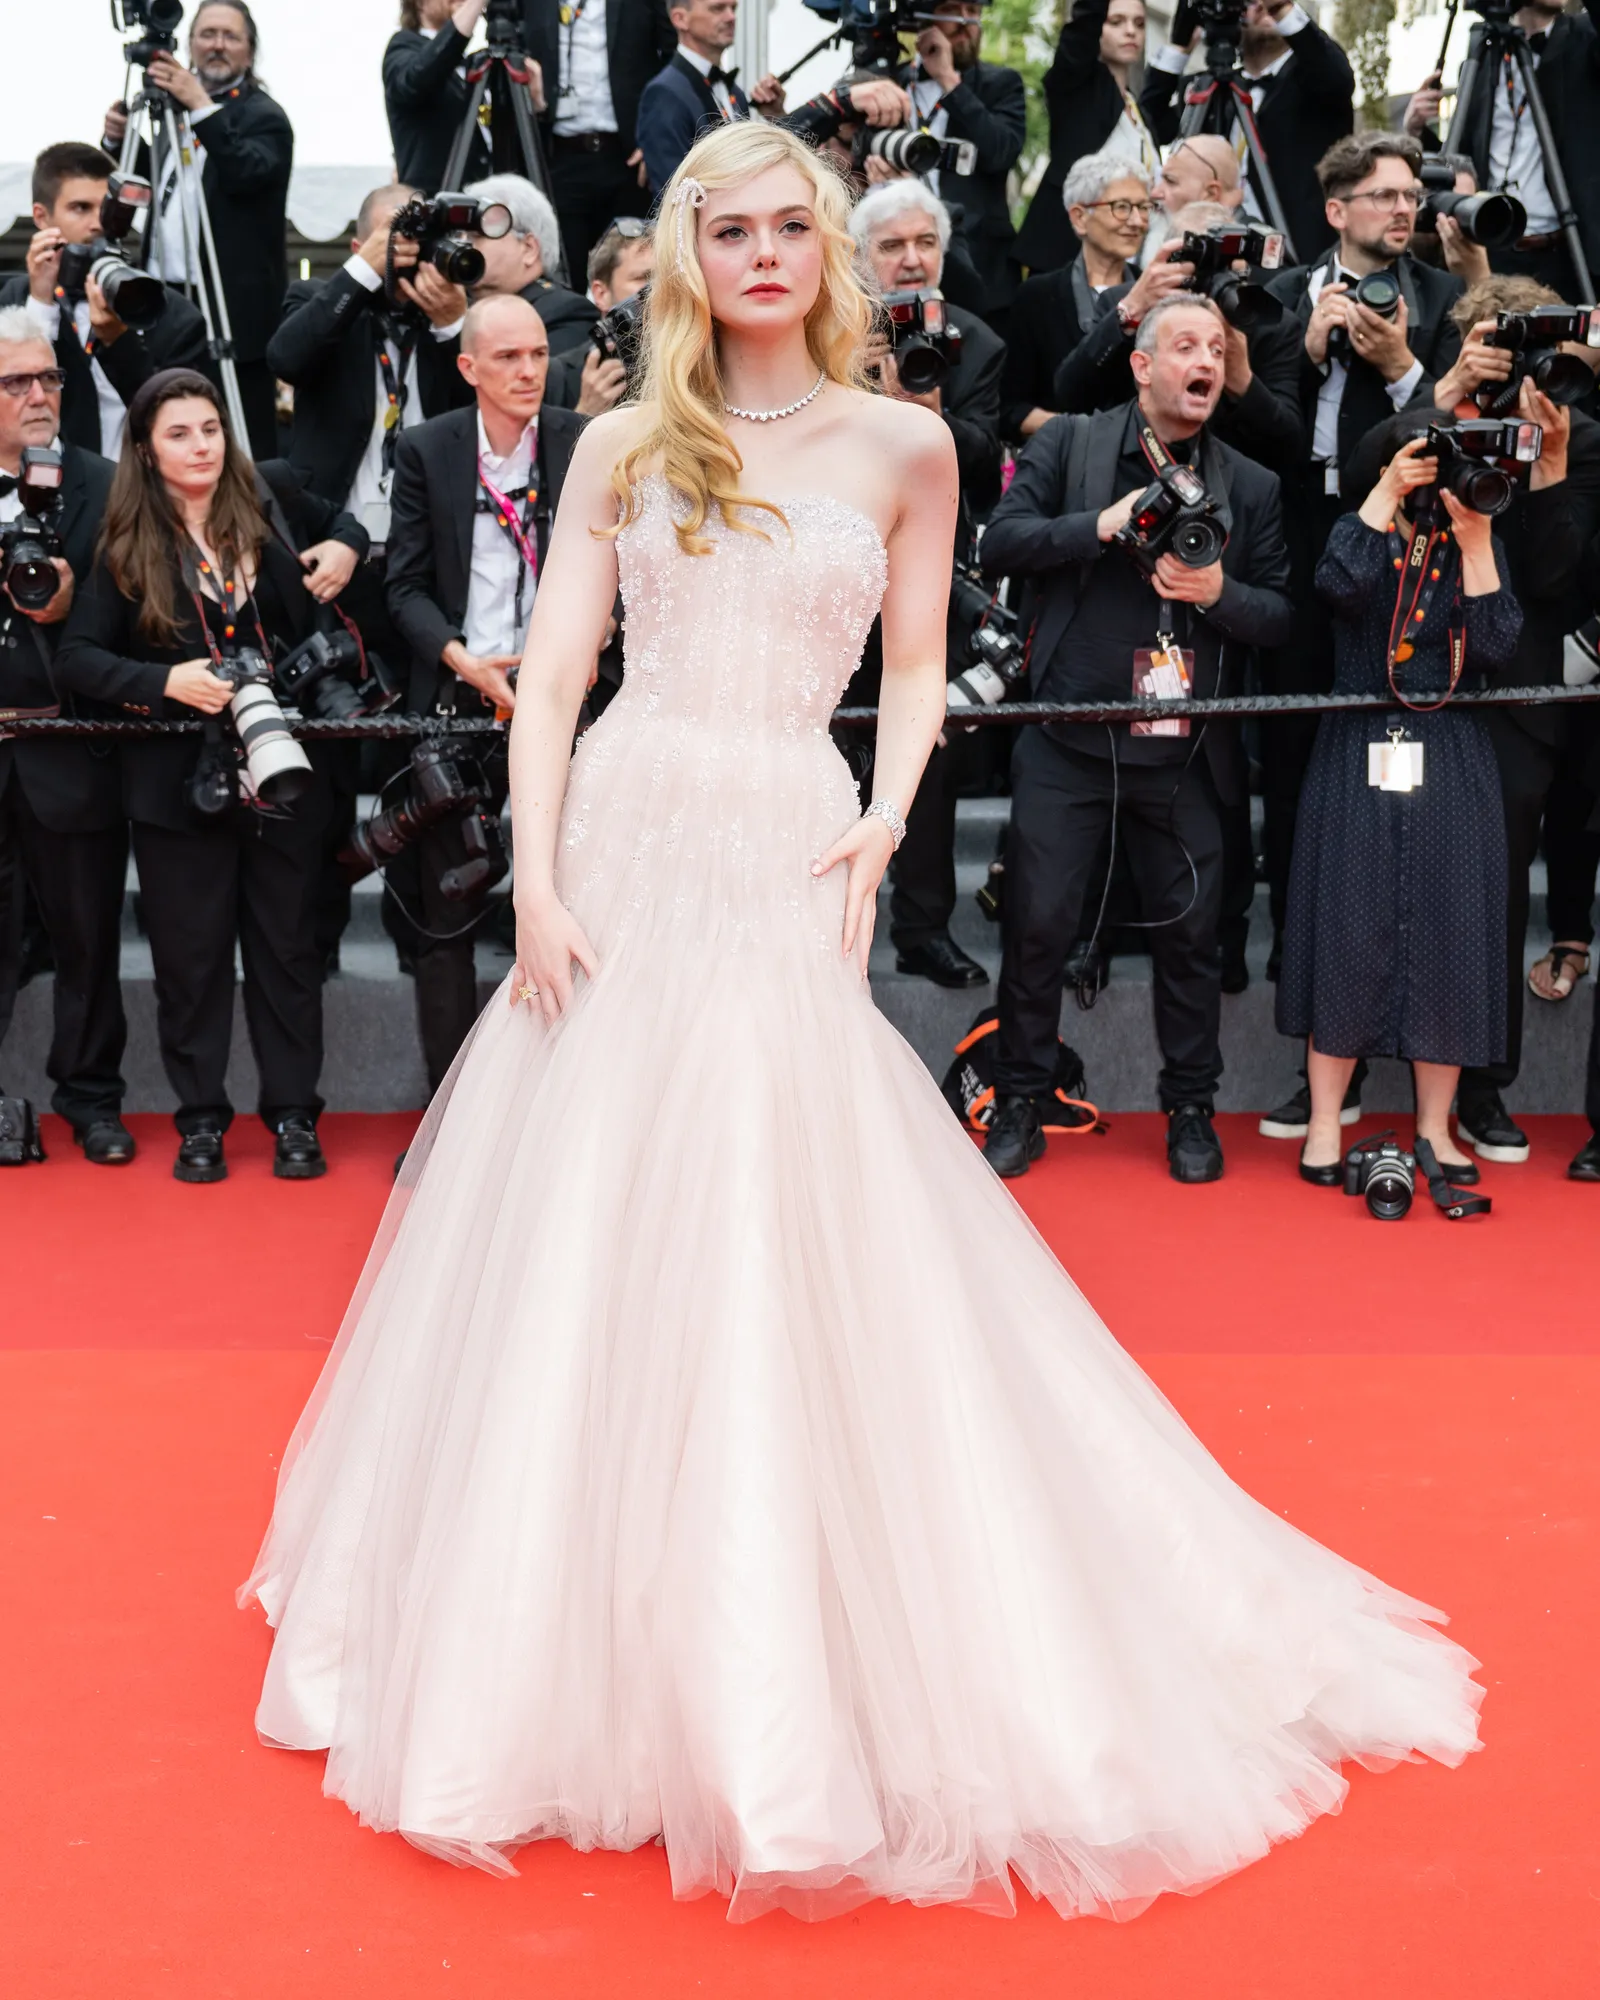 Elle Fanning at the 2022 cannes film festival